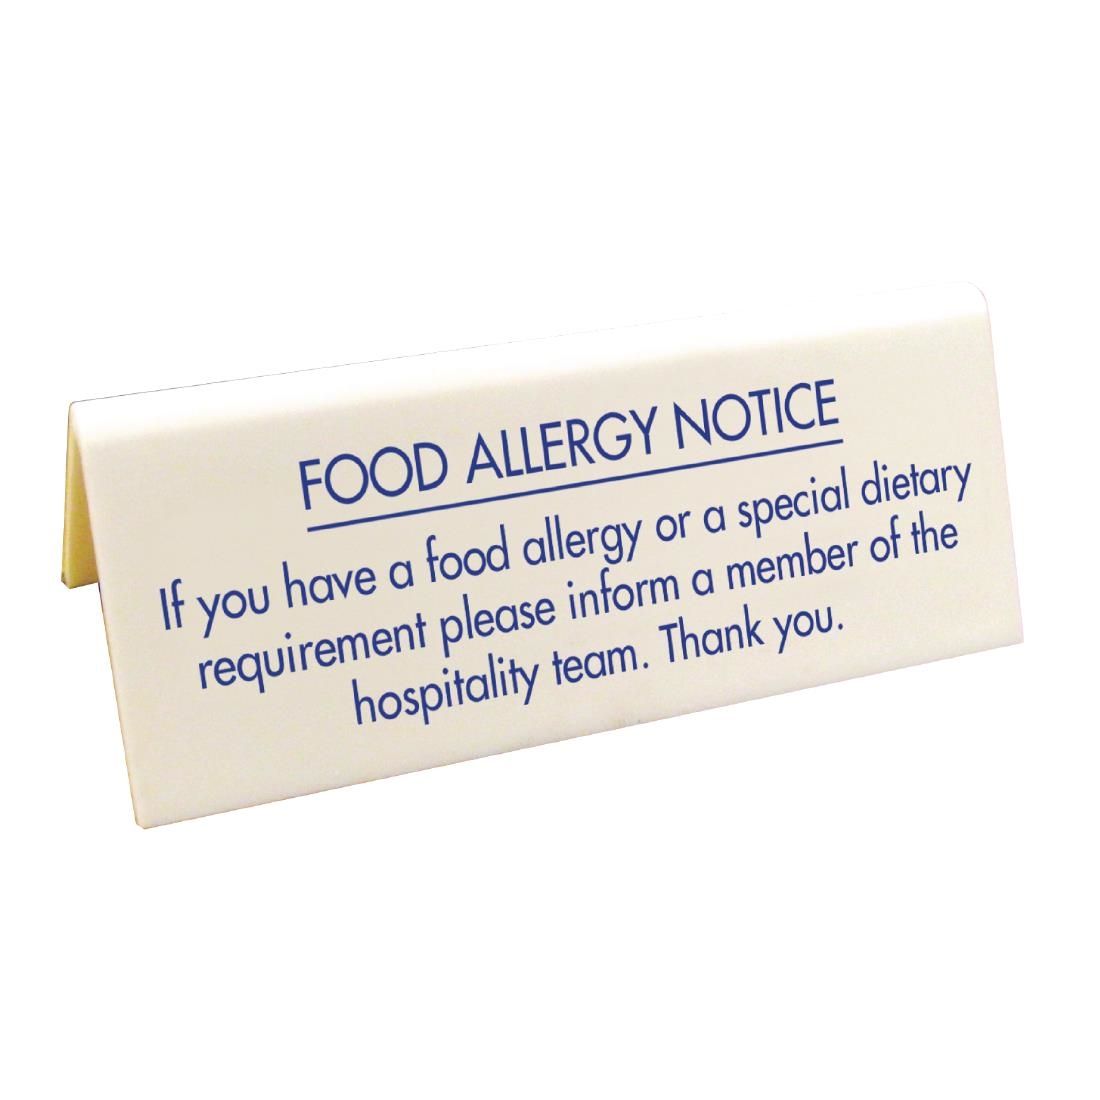 Food allergy Table Notice JD Catering Equipment Solutions Ltd